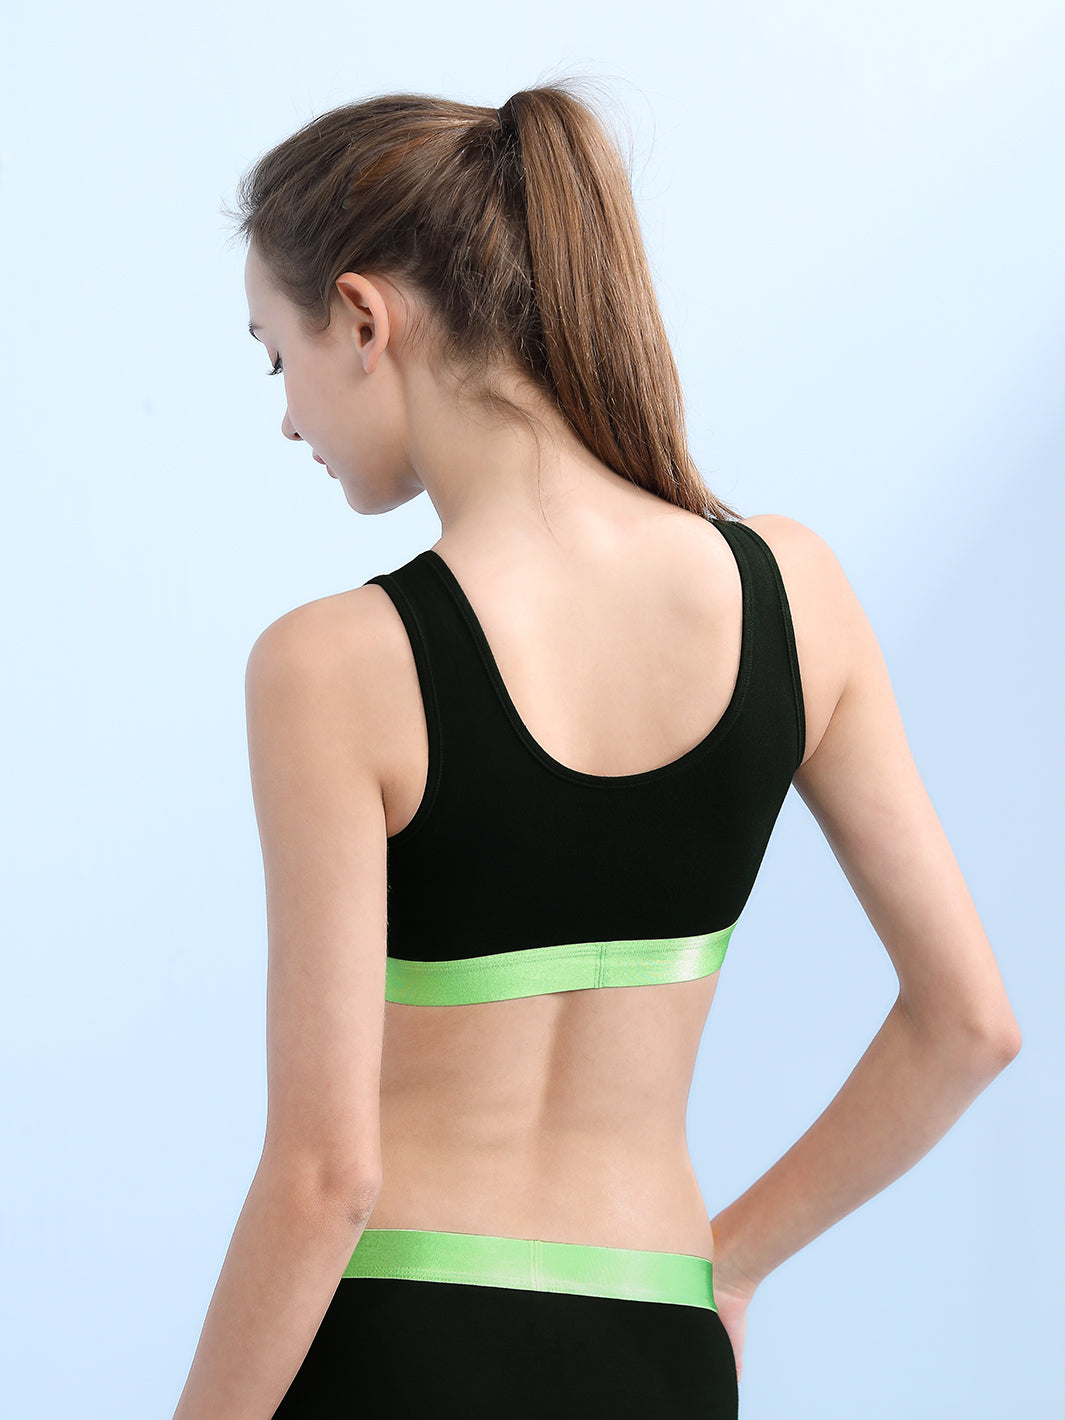 George Girls' Trainer Bras (2 units), Delivery Near You